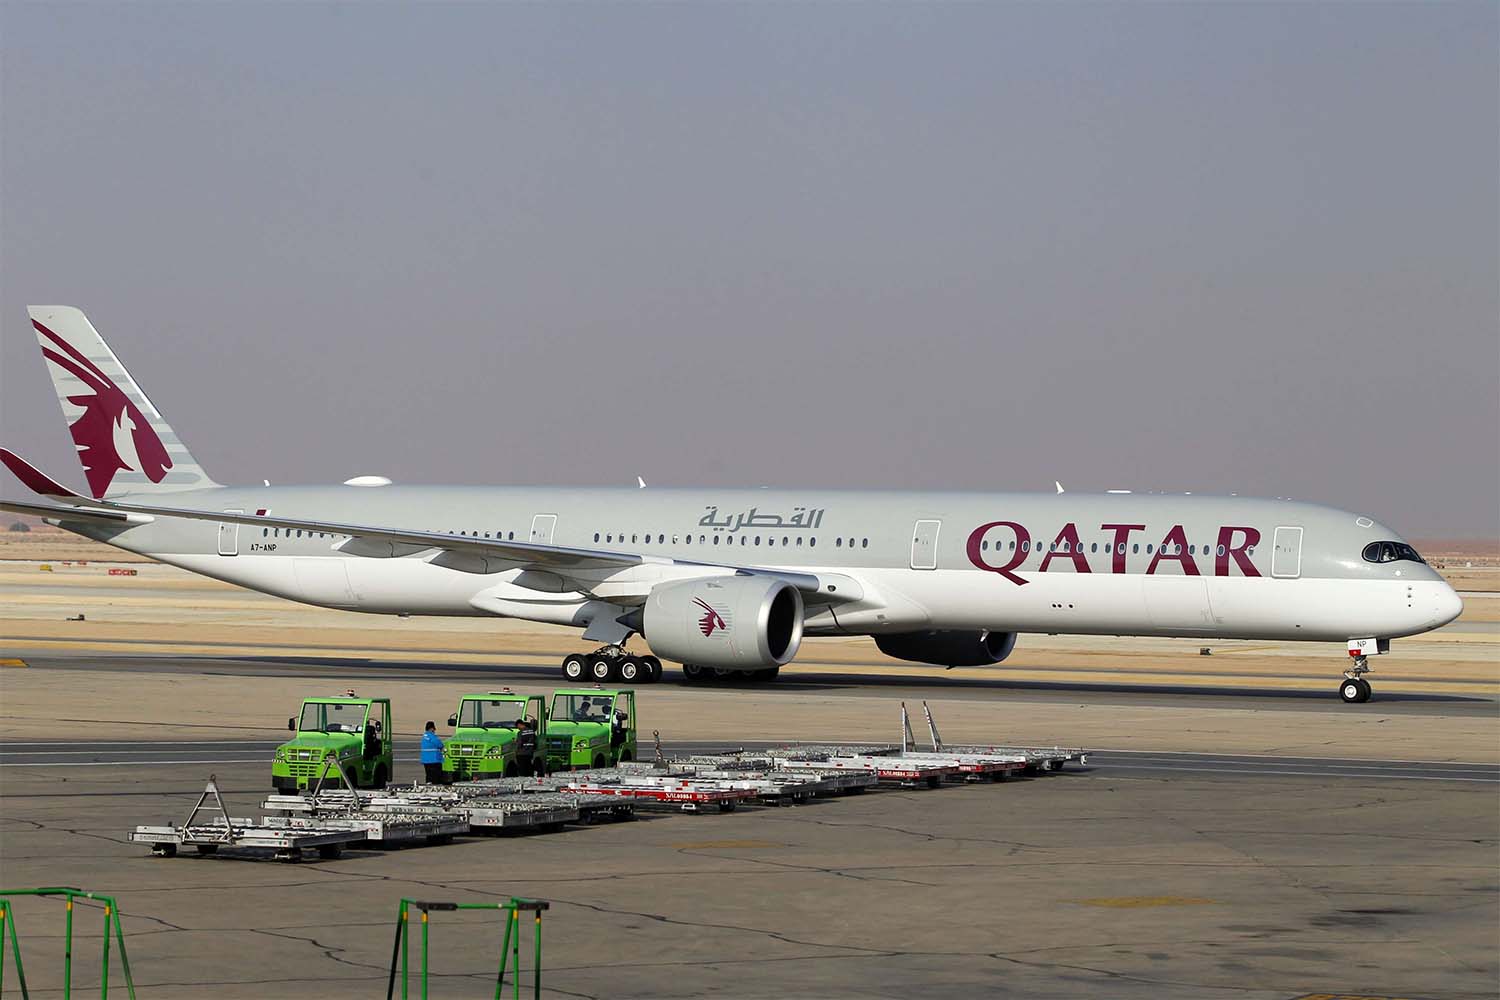 Qatar Airways was expected to restart flights between Doha and Egypt on Friday